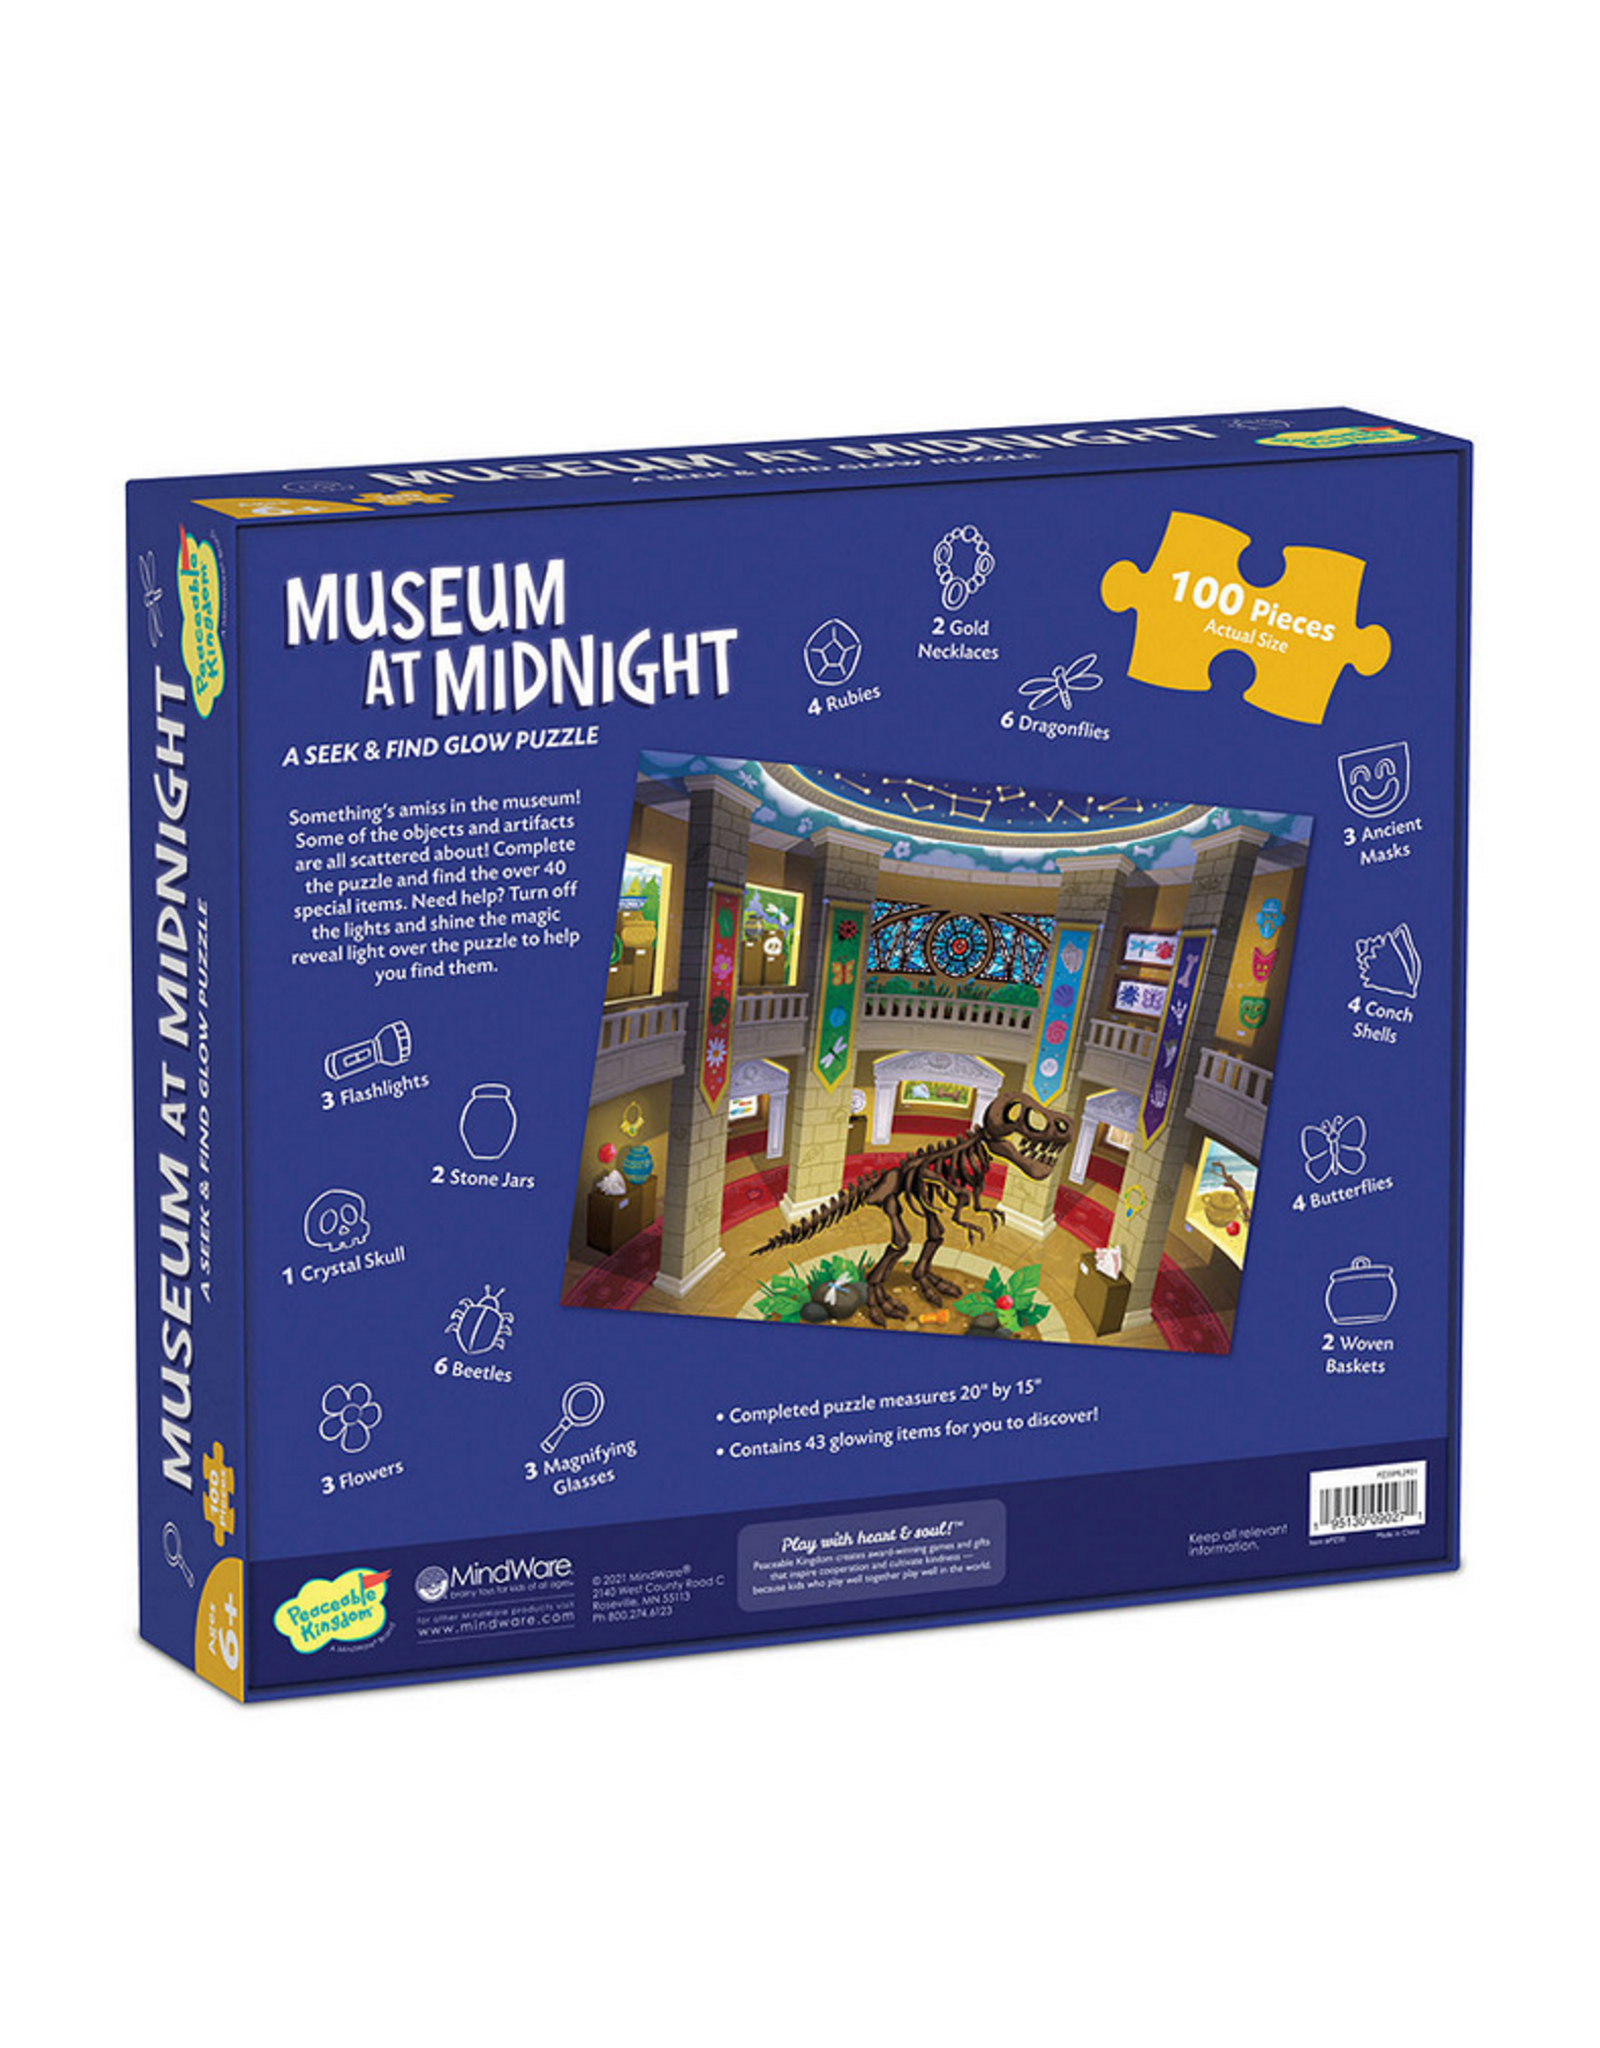 Peaceable Kingdom Museum At Midnight Seek & Find Glow Puzzle